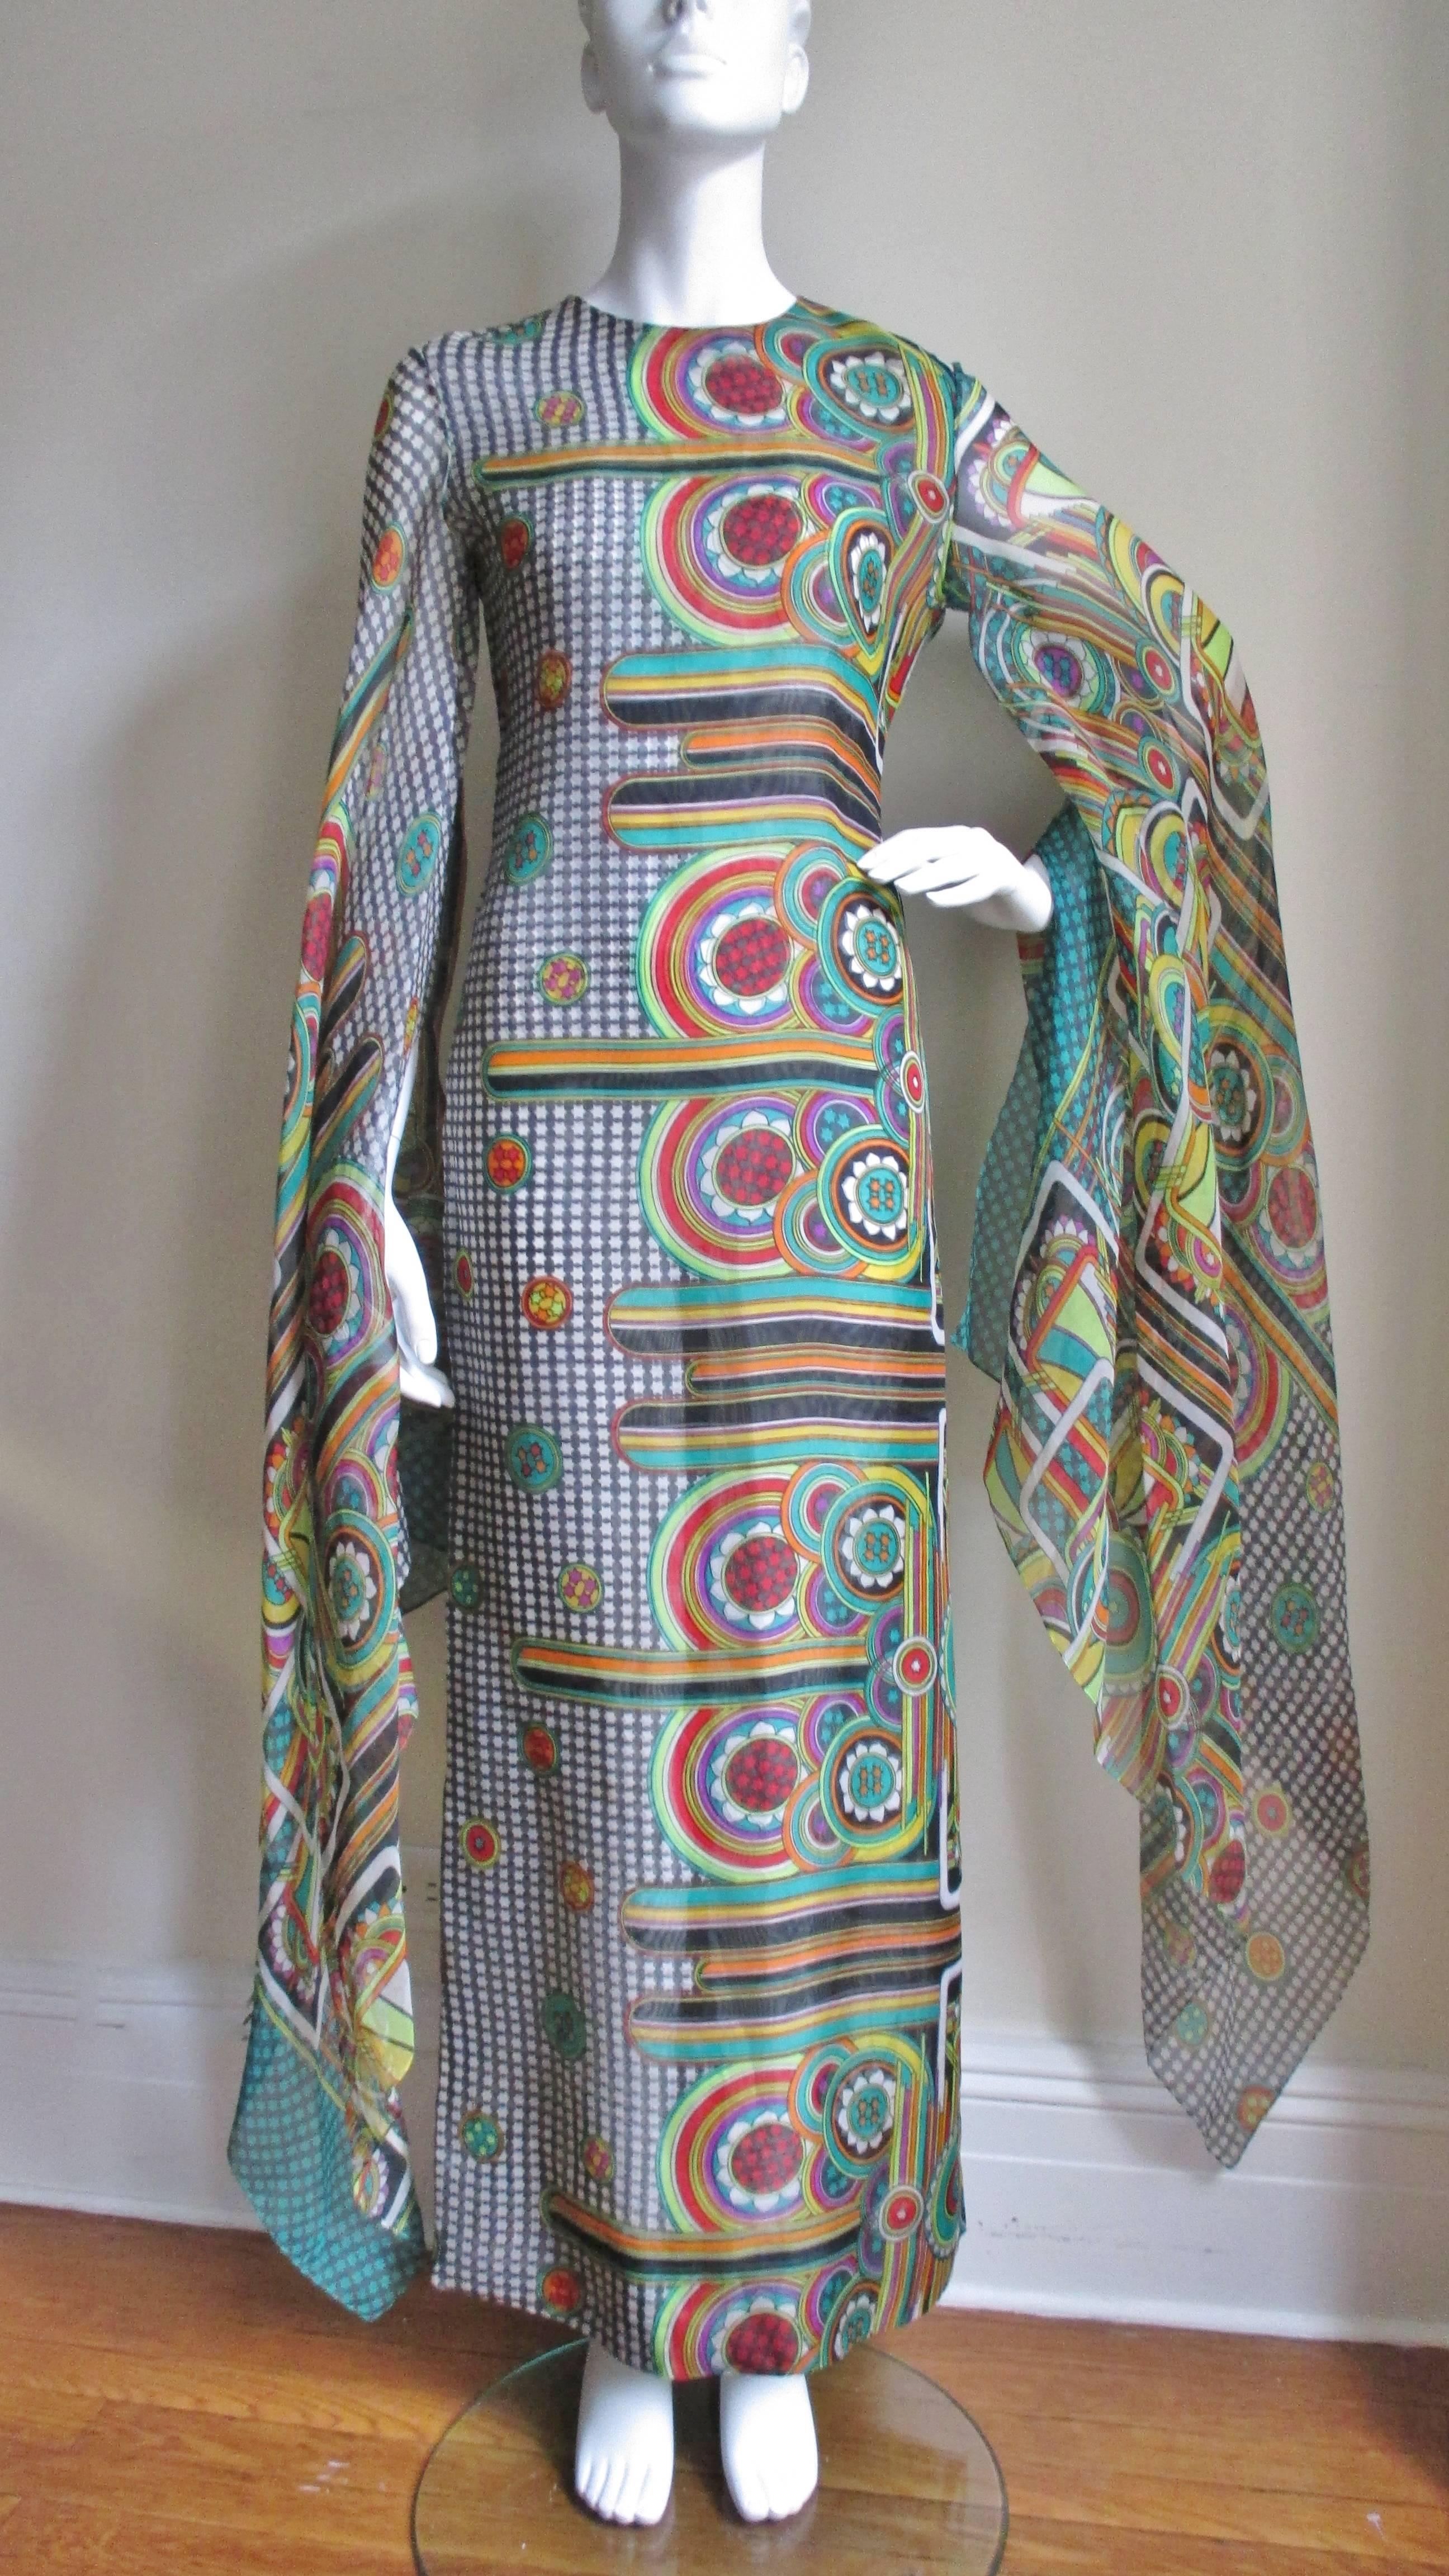 Absolutely incredible vibrantly colored silk abstract patterned dress from Pierre Cardin. Full length skimming the body with incredible floor length angel sleeves. The pattern is a work of art and different on each side of the front and back of the